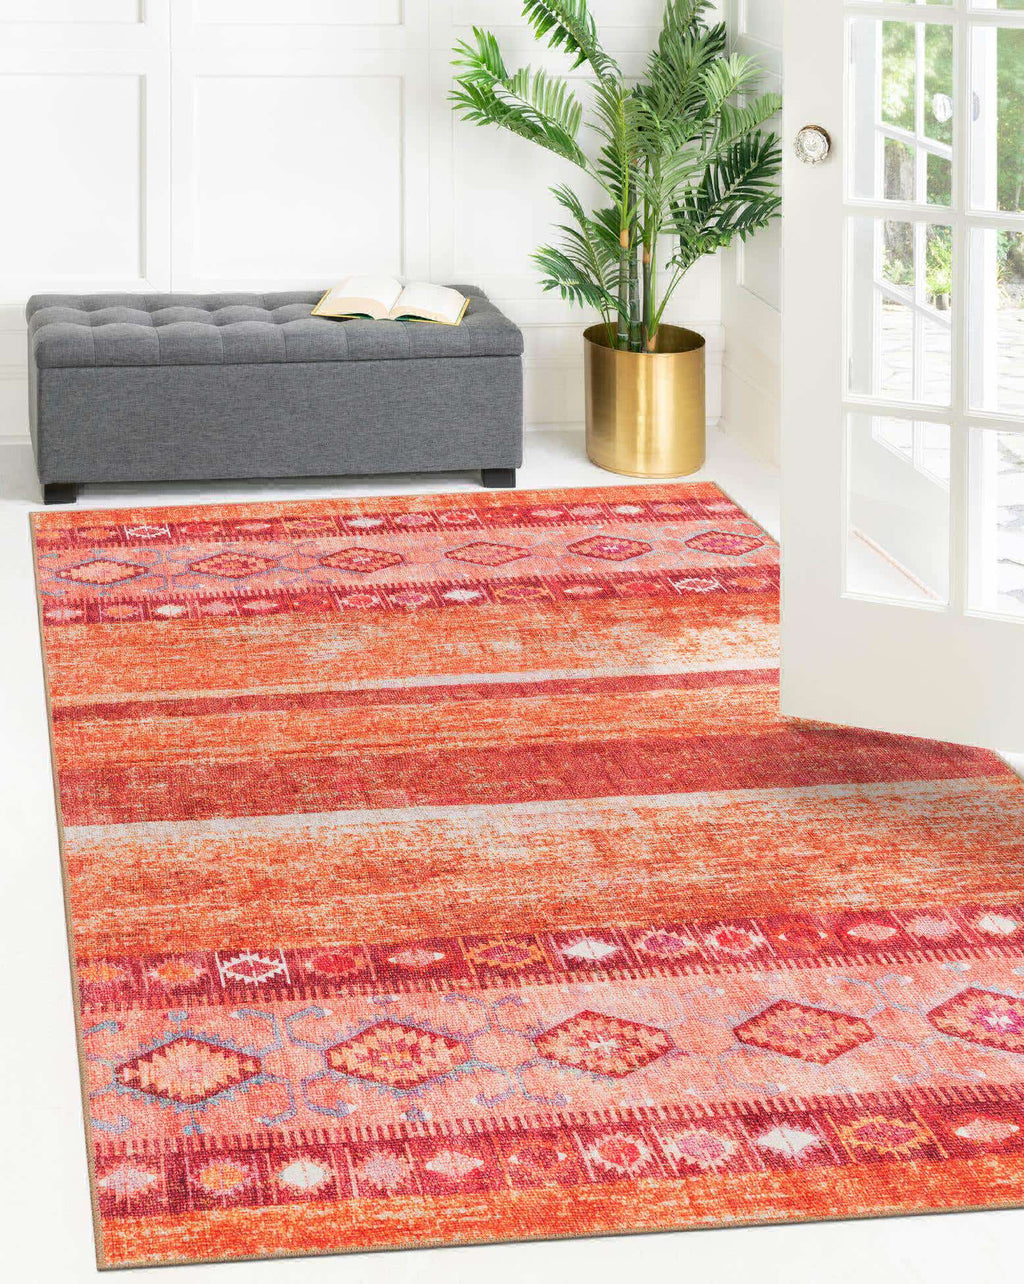 Unique Loom Timeless LEO-RVVL15 Rust Red Area Rug Rectangle Lifestyle Image Feature